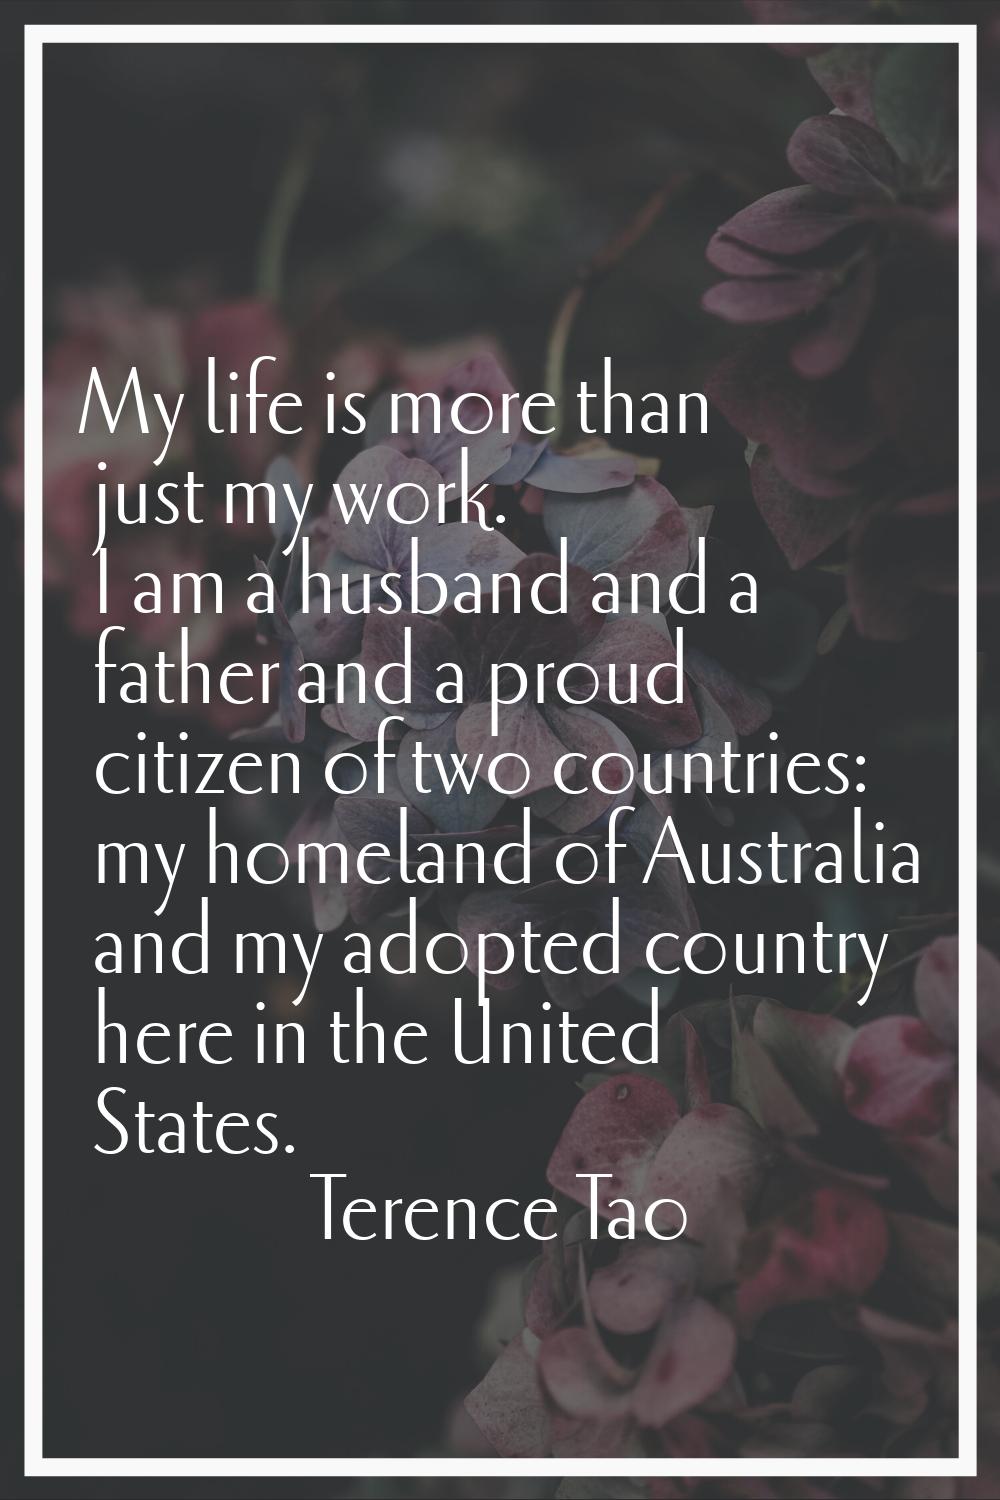 My life is more than just my work. I am a husband and a father and a proud citizen of two countries